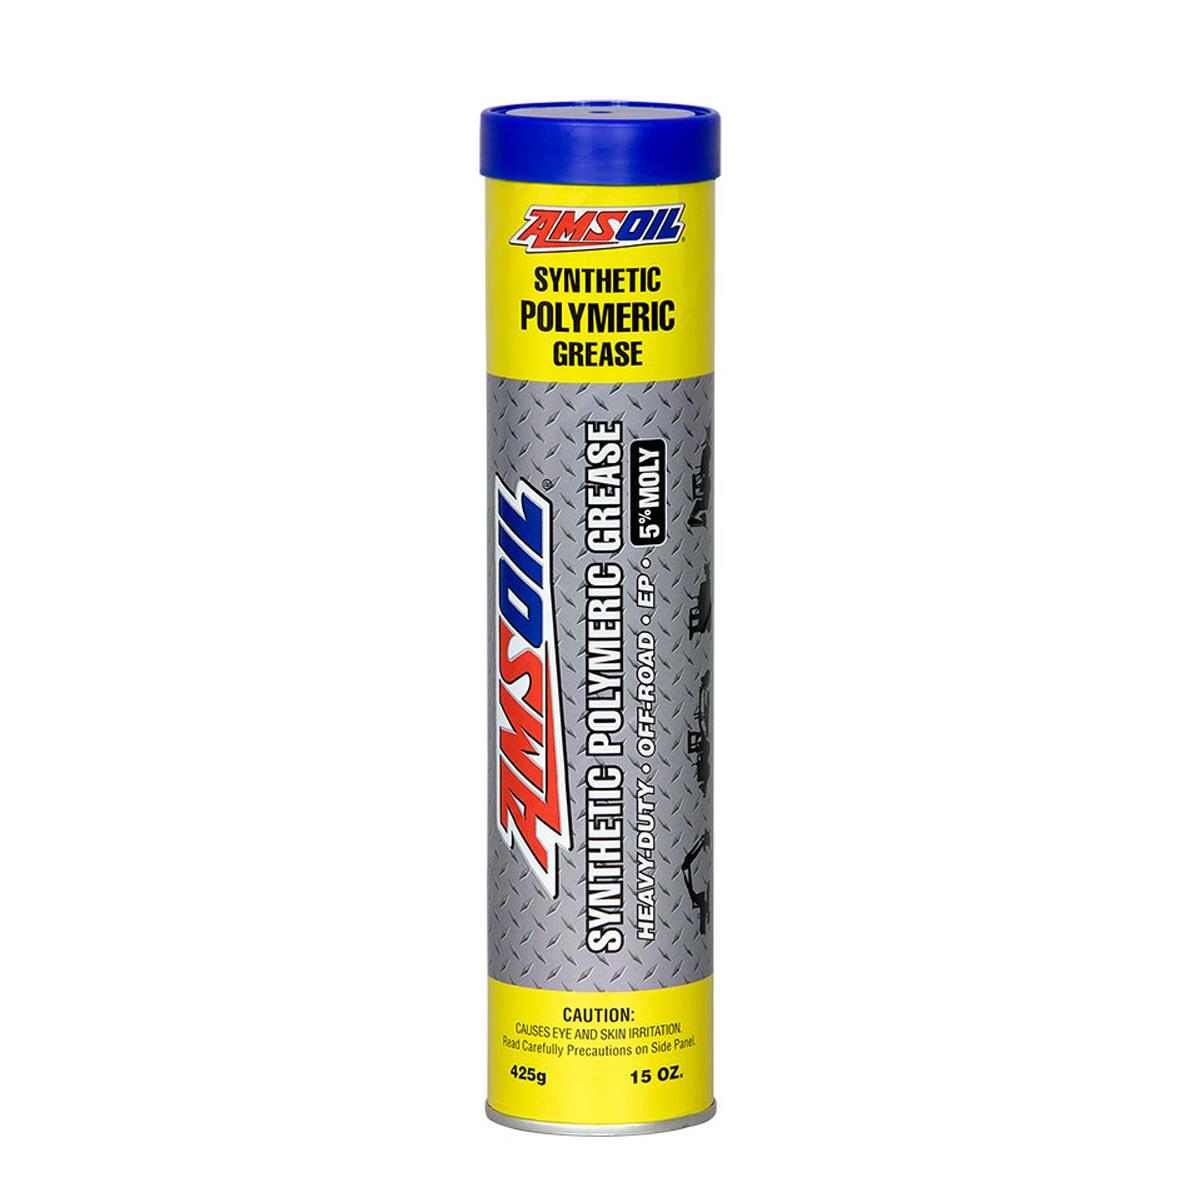 AMSOIL Synthetic Polymeric Off-Road Grease NLGI #1